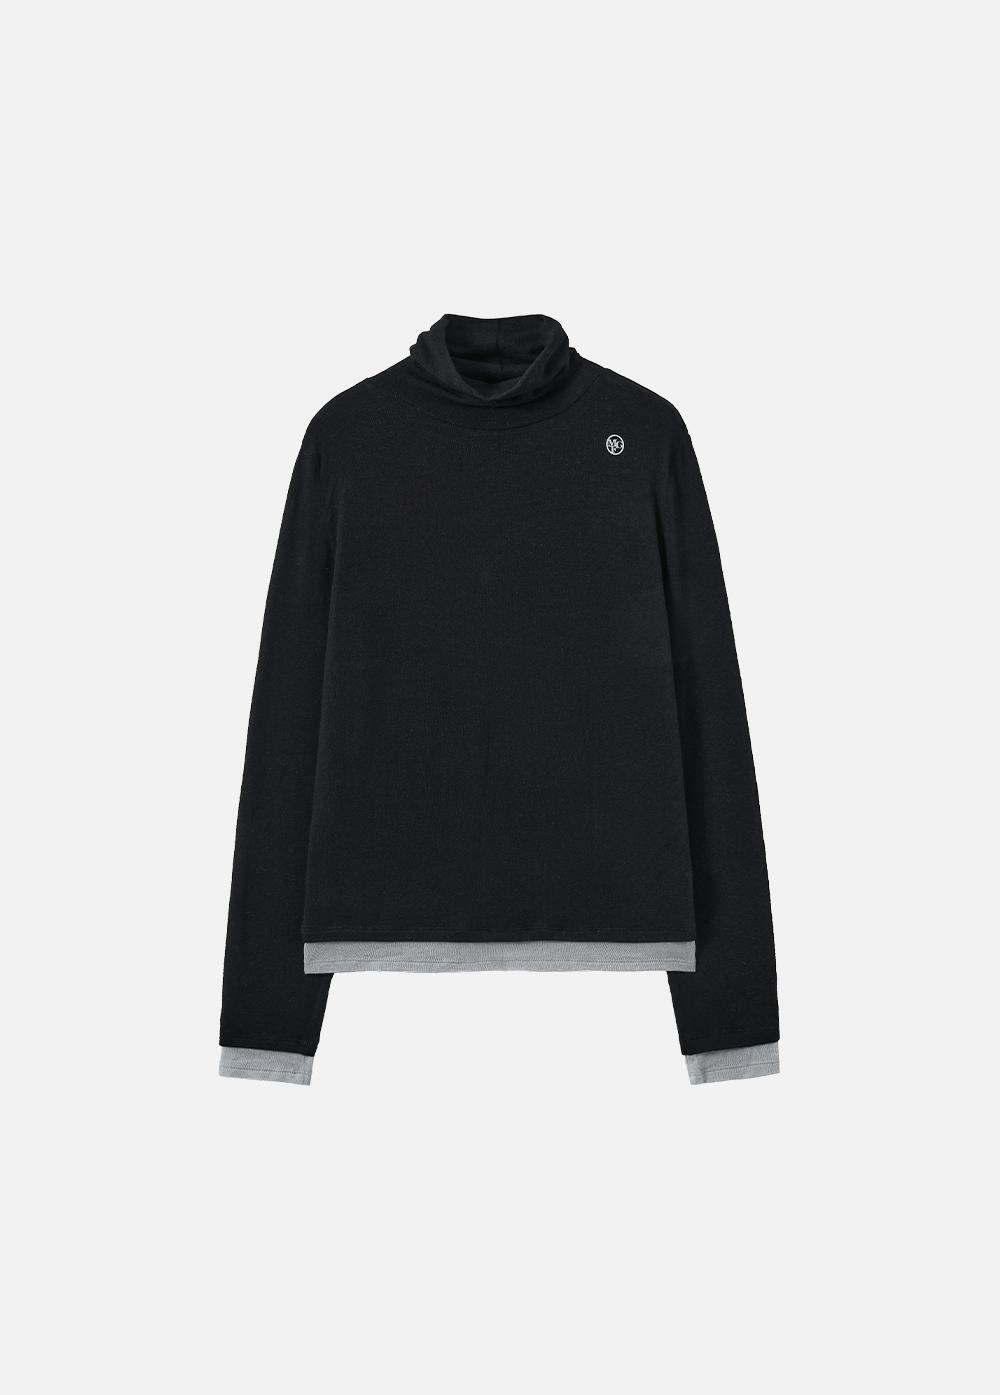 W LAYERED POINT TURTLE NECK LONG SLEEVE black